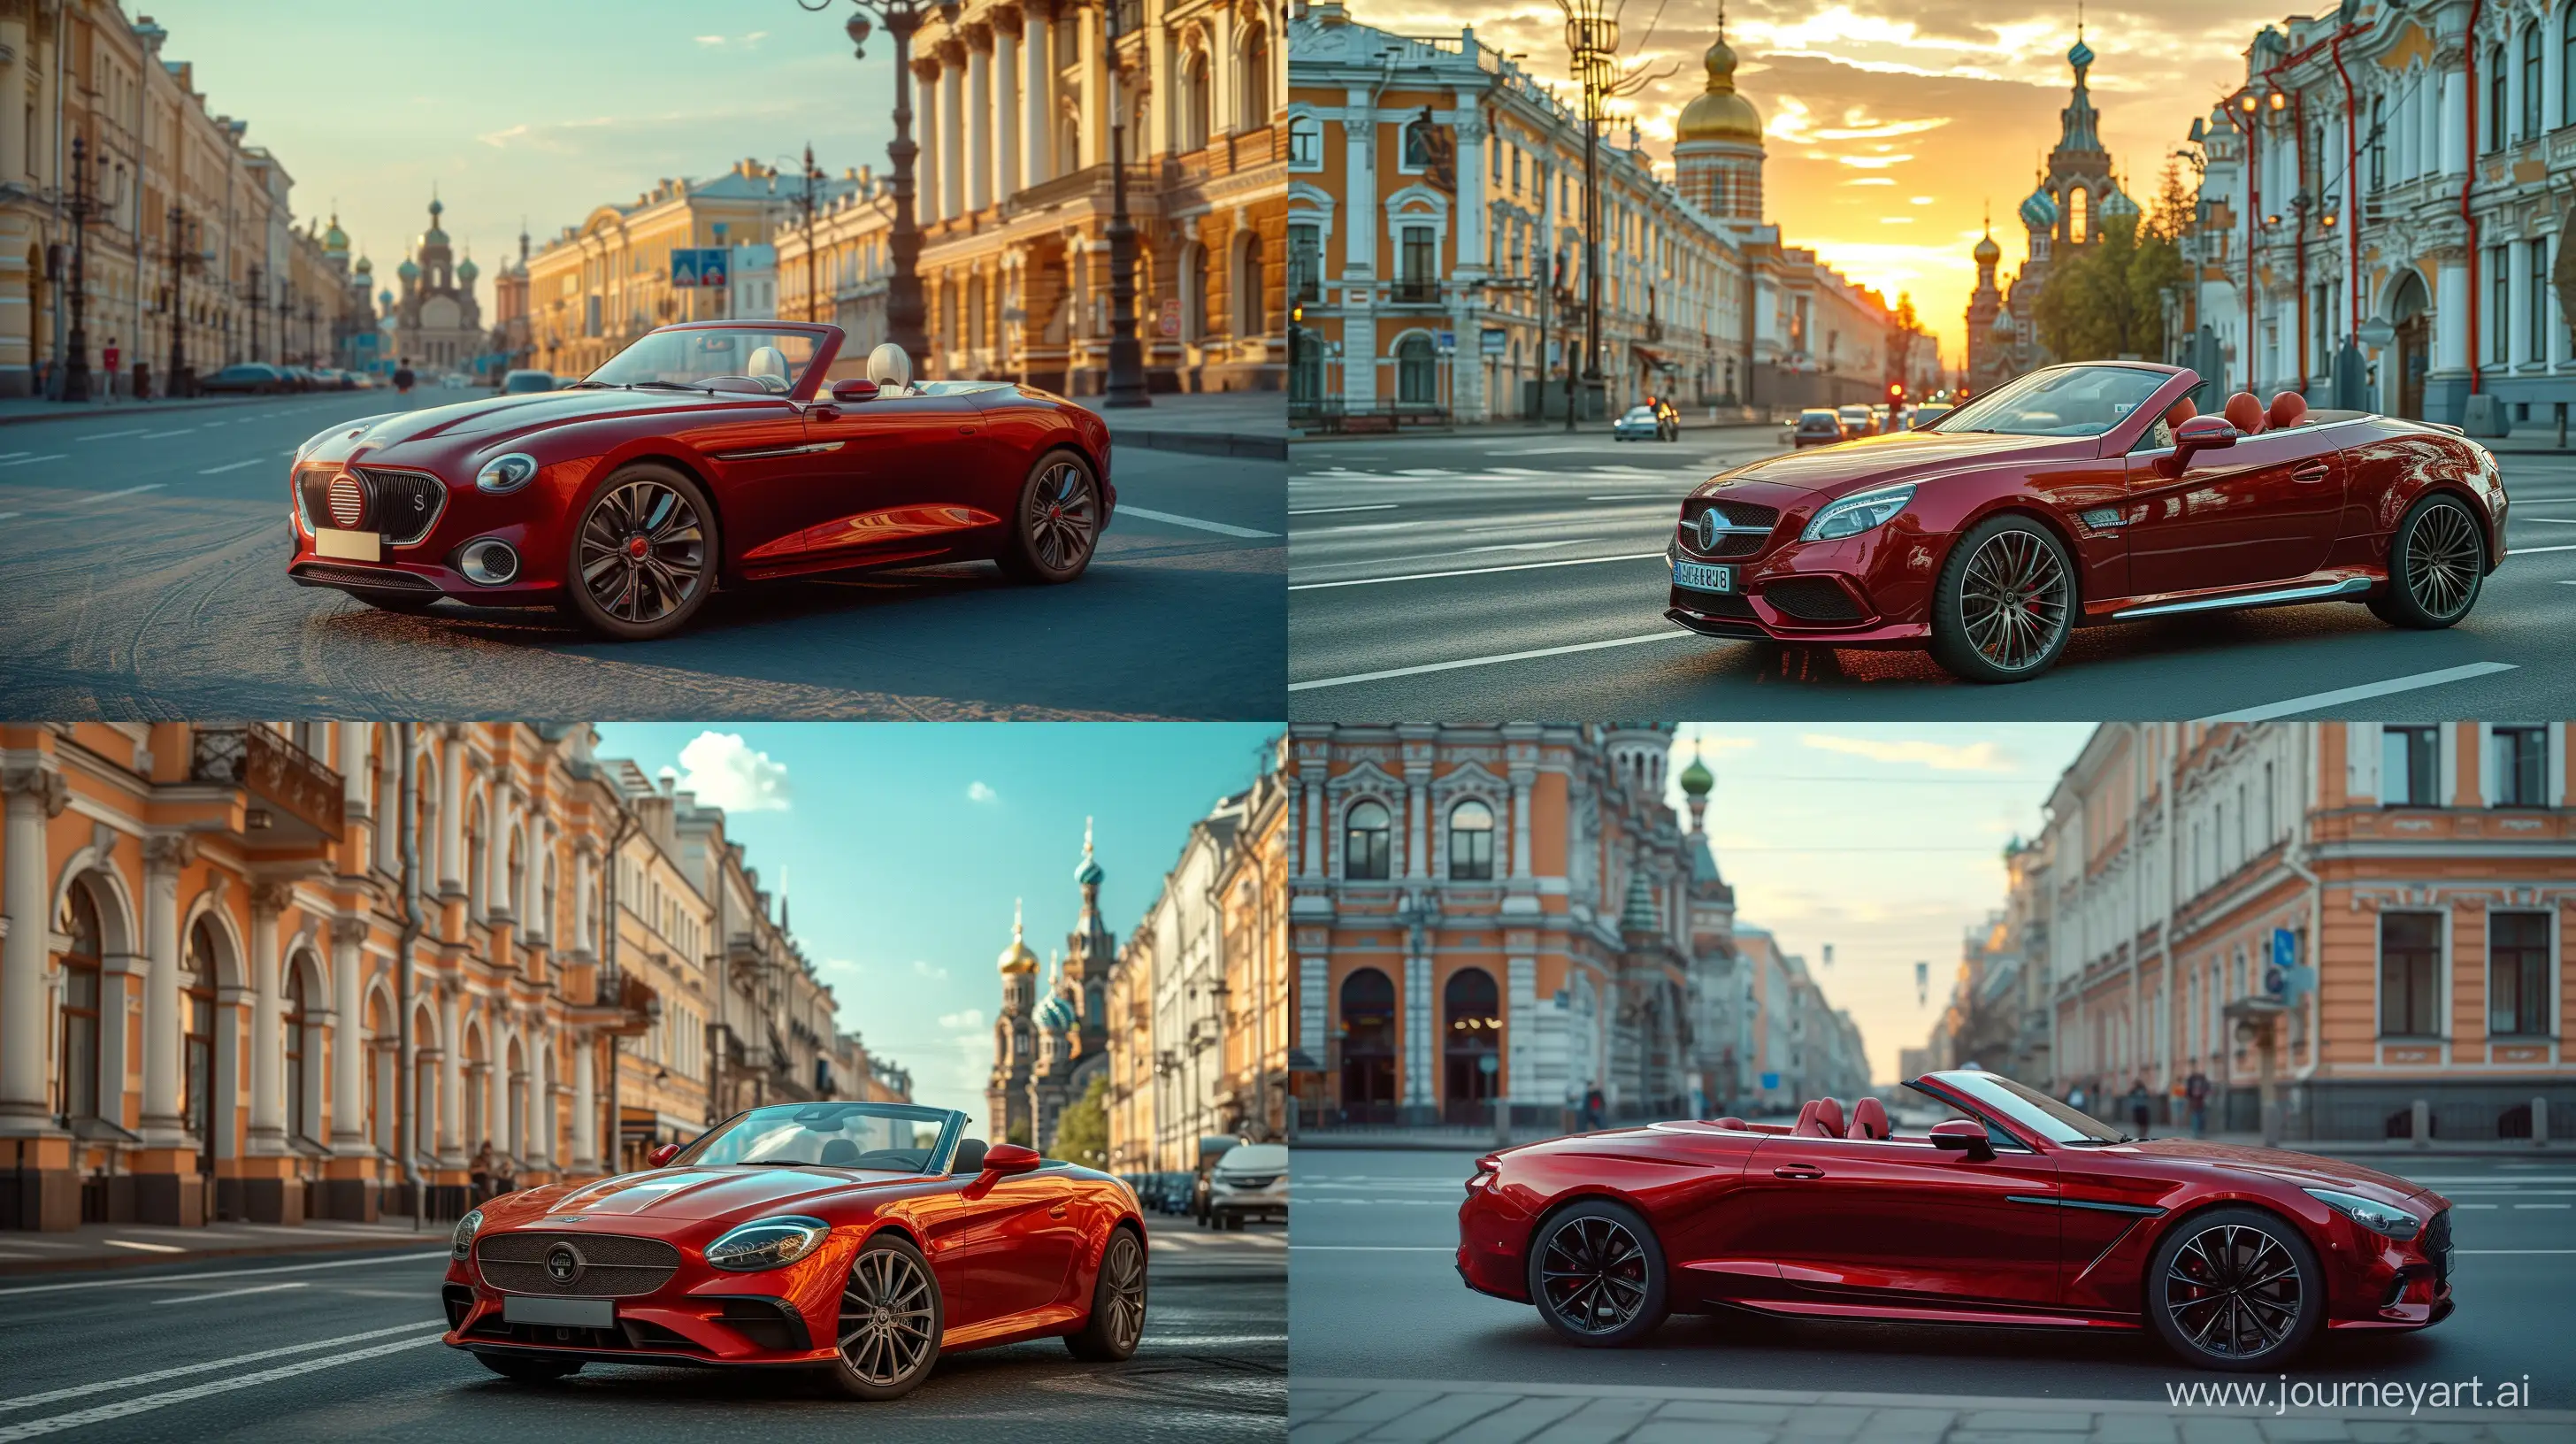 Vibrant-Summer-Scene-Red-Convertible-Car-in-St-Petersburg-Streets